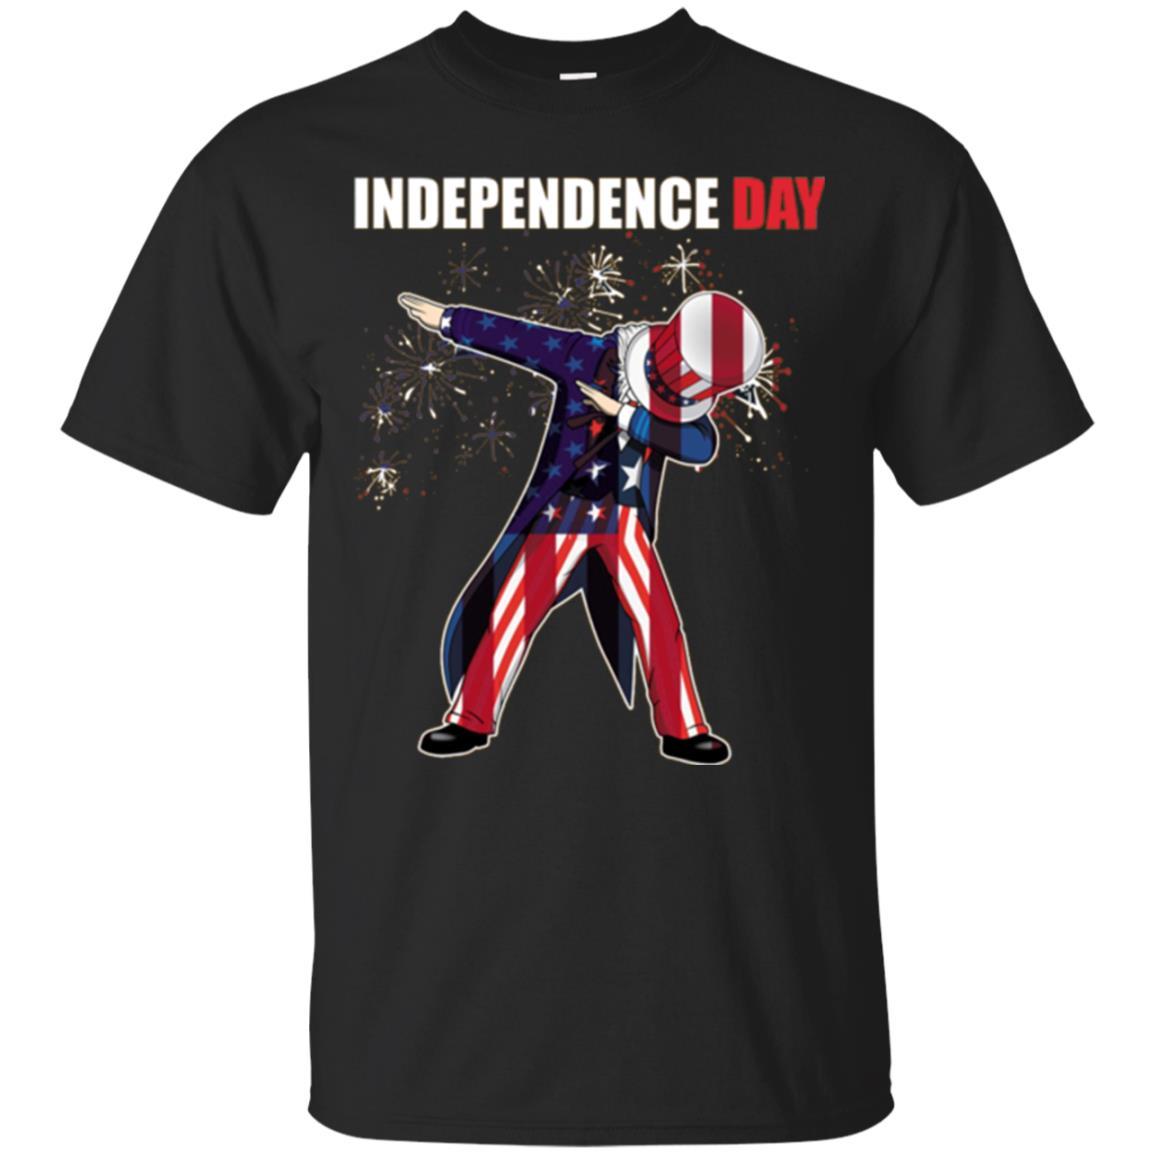 The Dabbing Uncle Sam Independence Day Usa Party Tshirt Jaq T-shirt